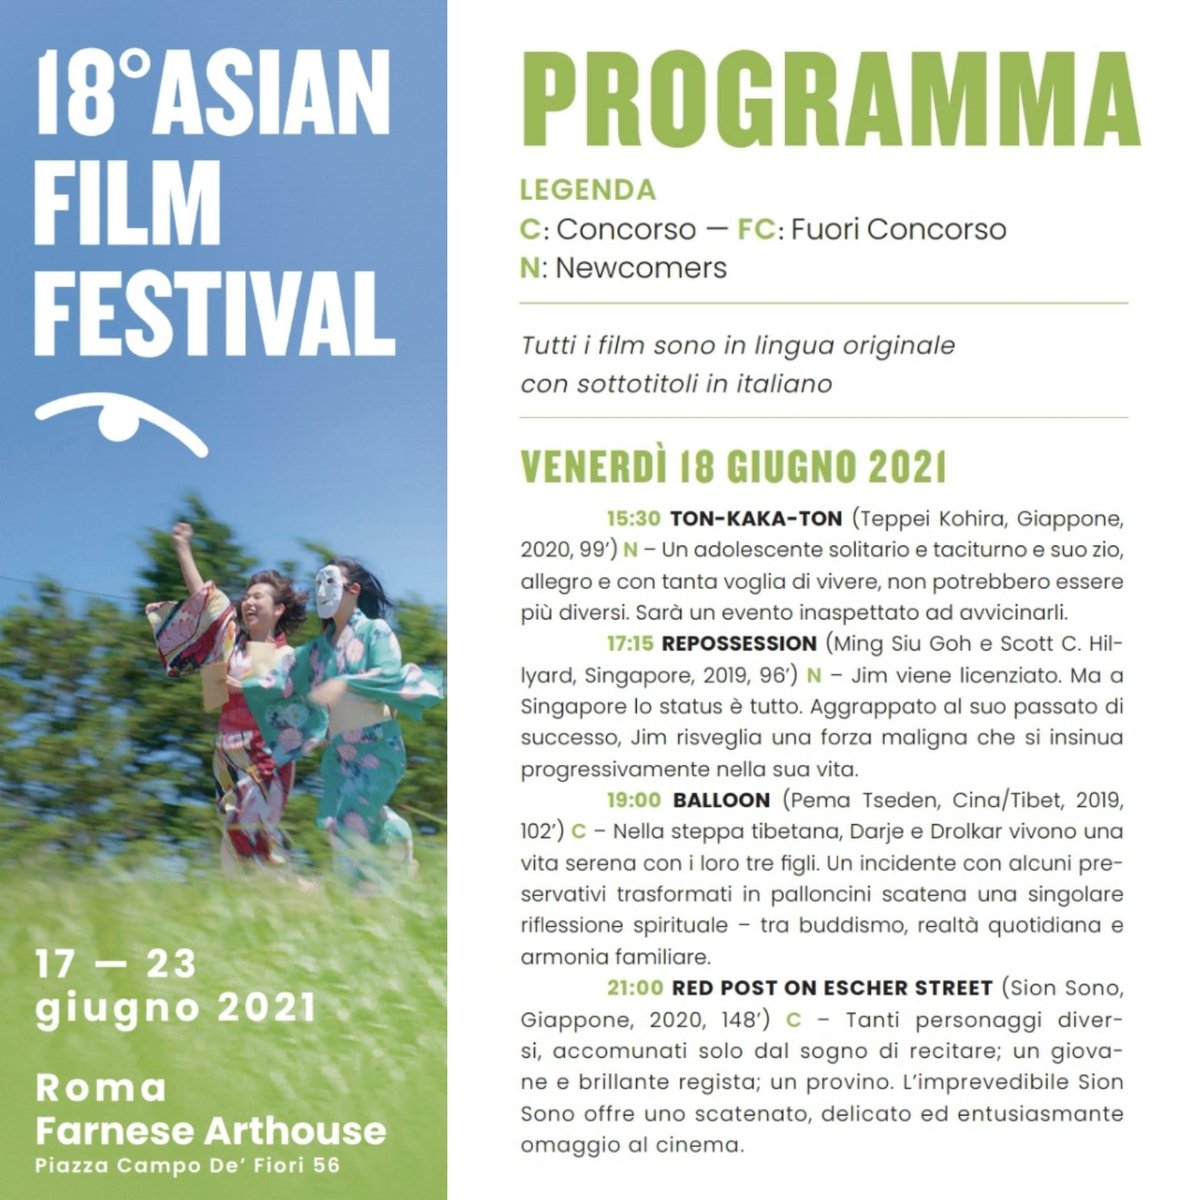 The #AsianFilmFestival programme is out! Our Italian #premiere is 18 June 5:15pm at @CinemaFarnese #Rome. Can't wait to share our film with a new audience!

A film by @gohmingsiu
& @scottchillyard

#RepossessionFilm #MonkeyAndBoar #sgfilm #madeinsg #AFF18 #asianfilm #asianhorror